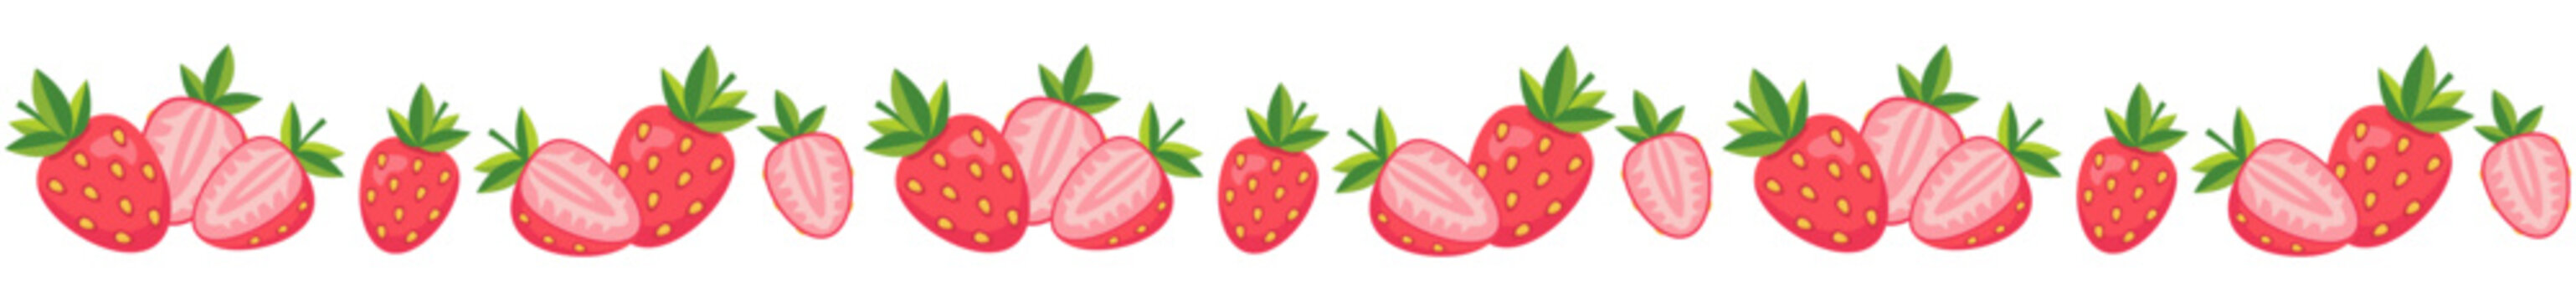 Seamless border with strawberry. Can be used for summer cards, letters, invitations. Isolated vector and PNG illustration on transparent background.